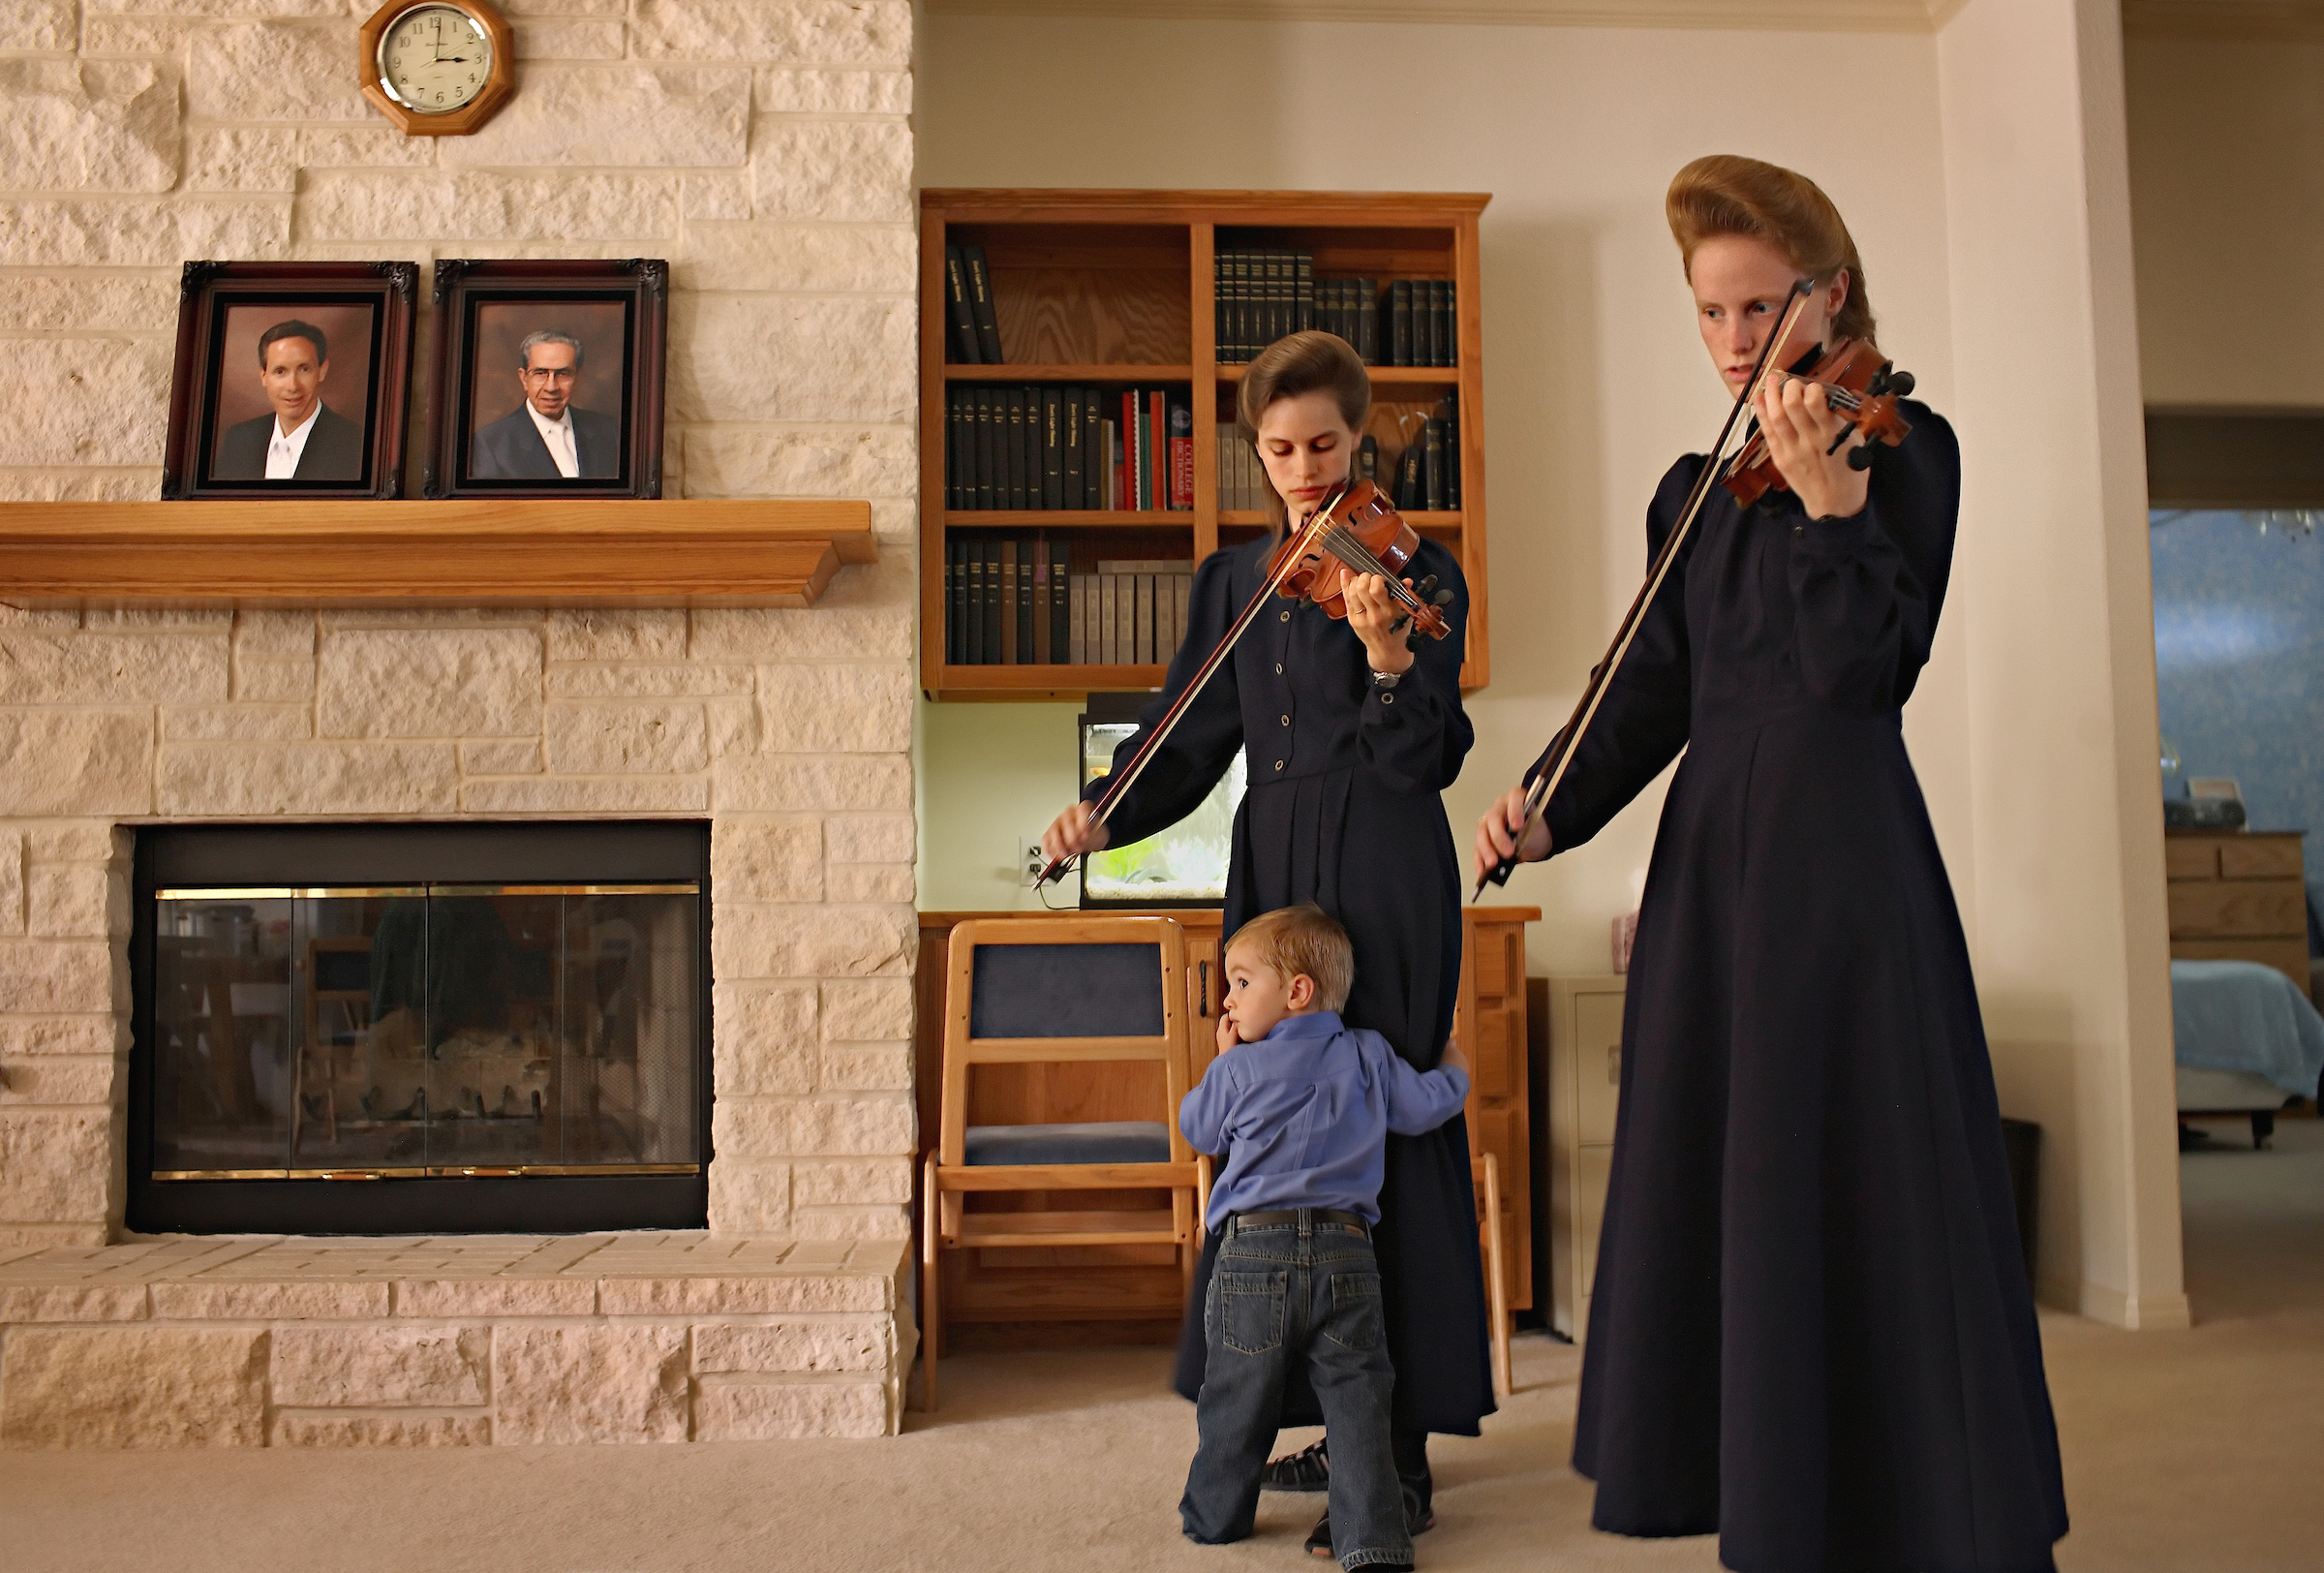 Before dinner daughters of the convicted FLDS leader play violin in the house where they took refuge after the 2008 raid.